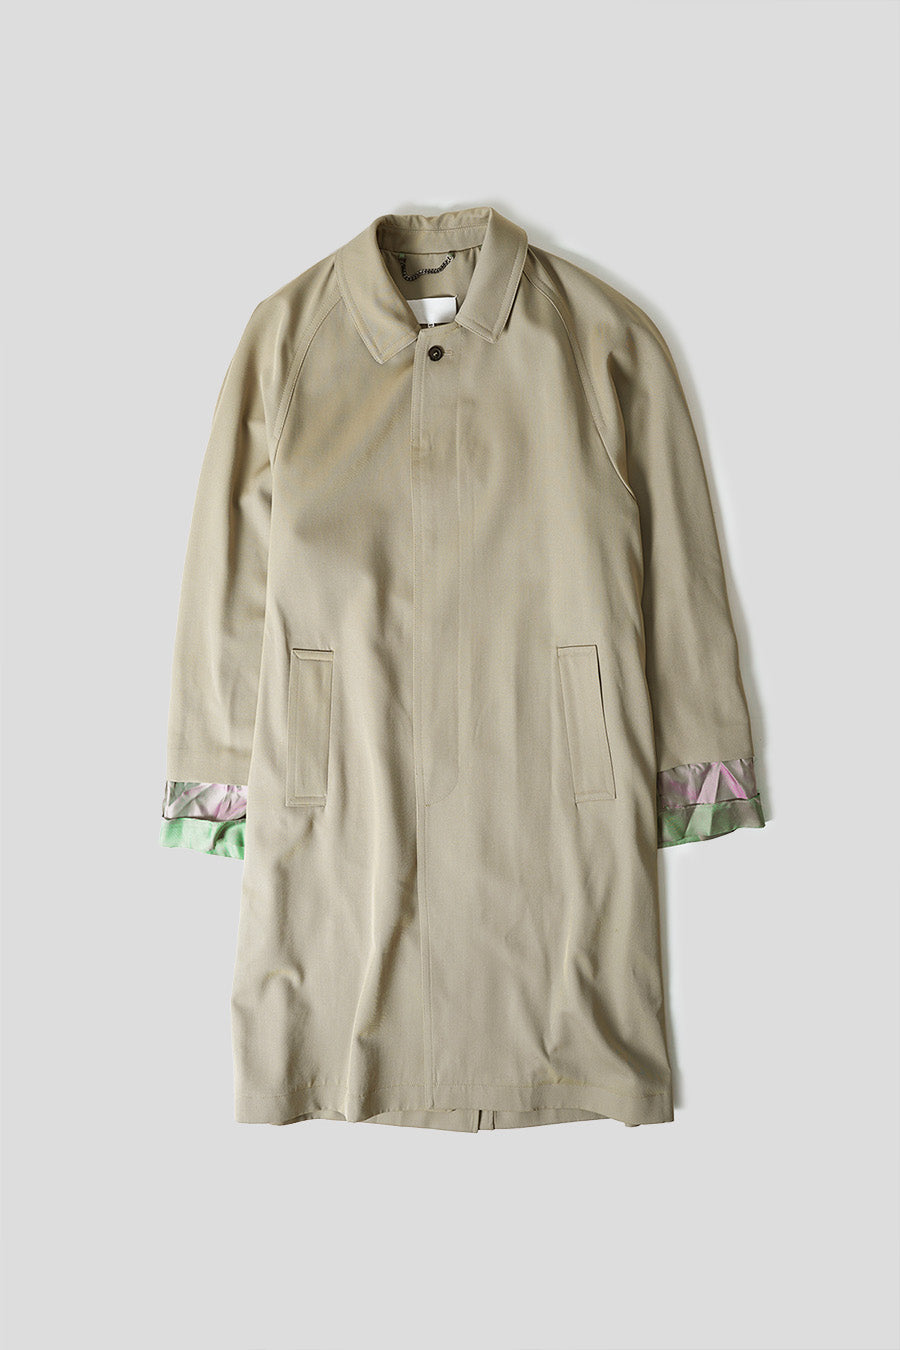 Maison Margiela - MANTEAU ANONYMITY OF THE LINING GRIS - LE LABO STORE